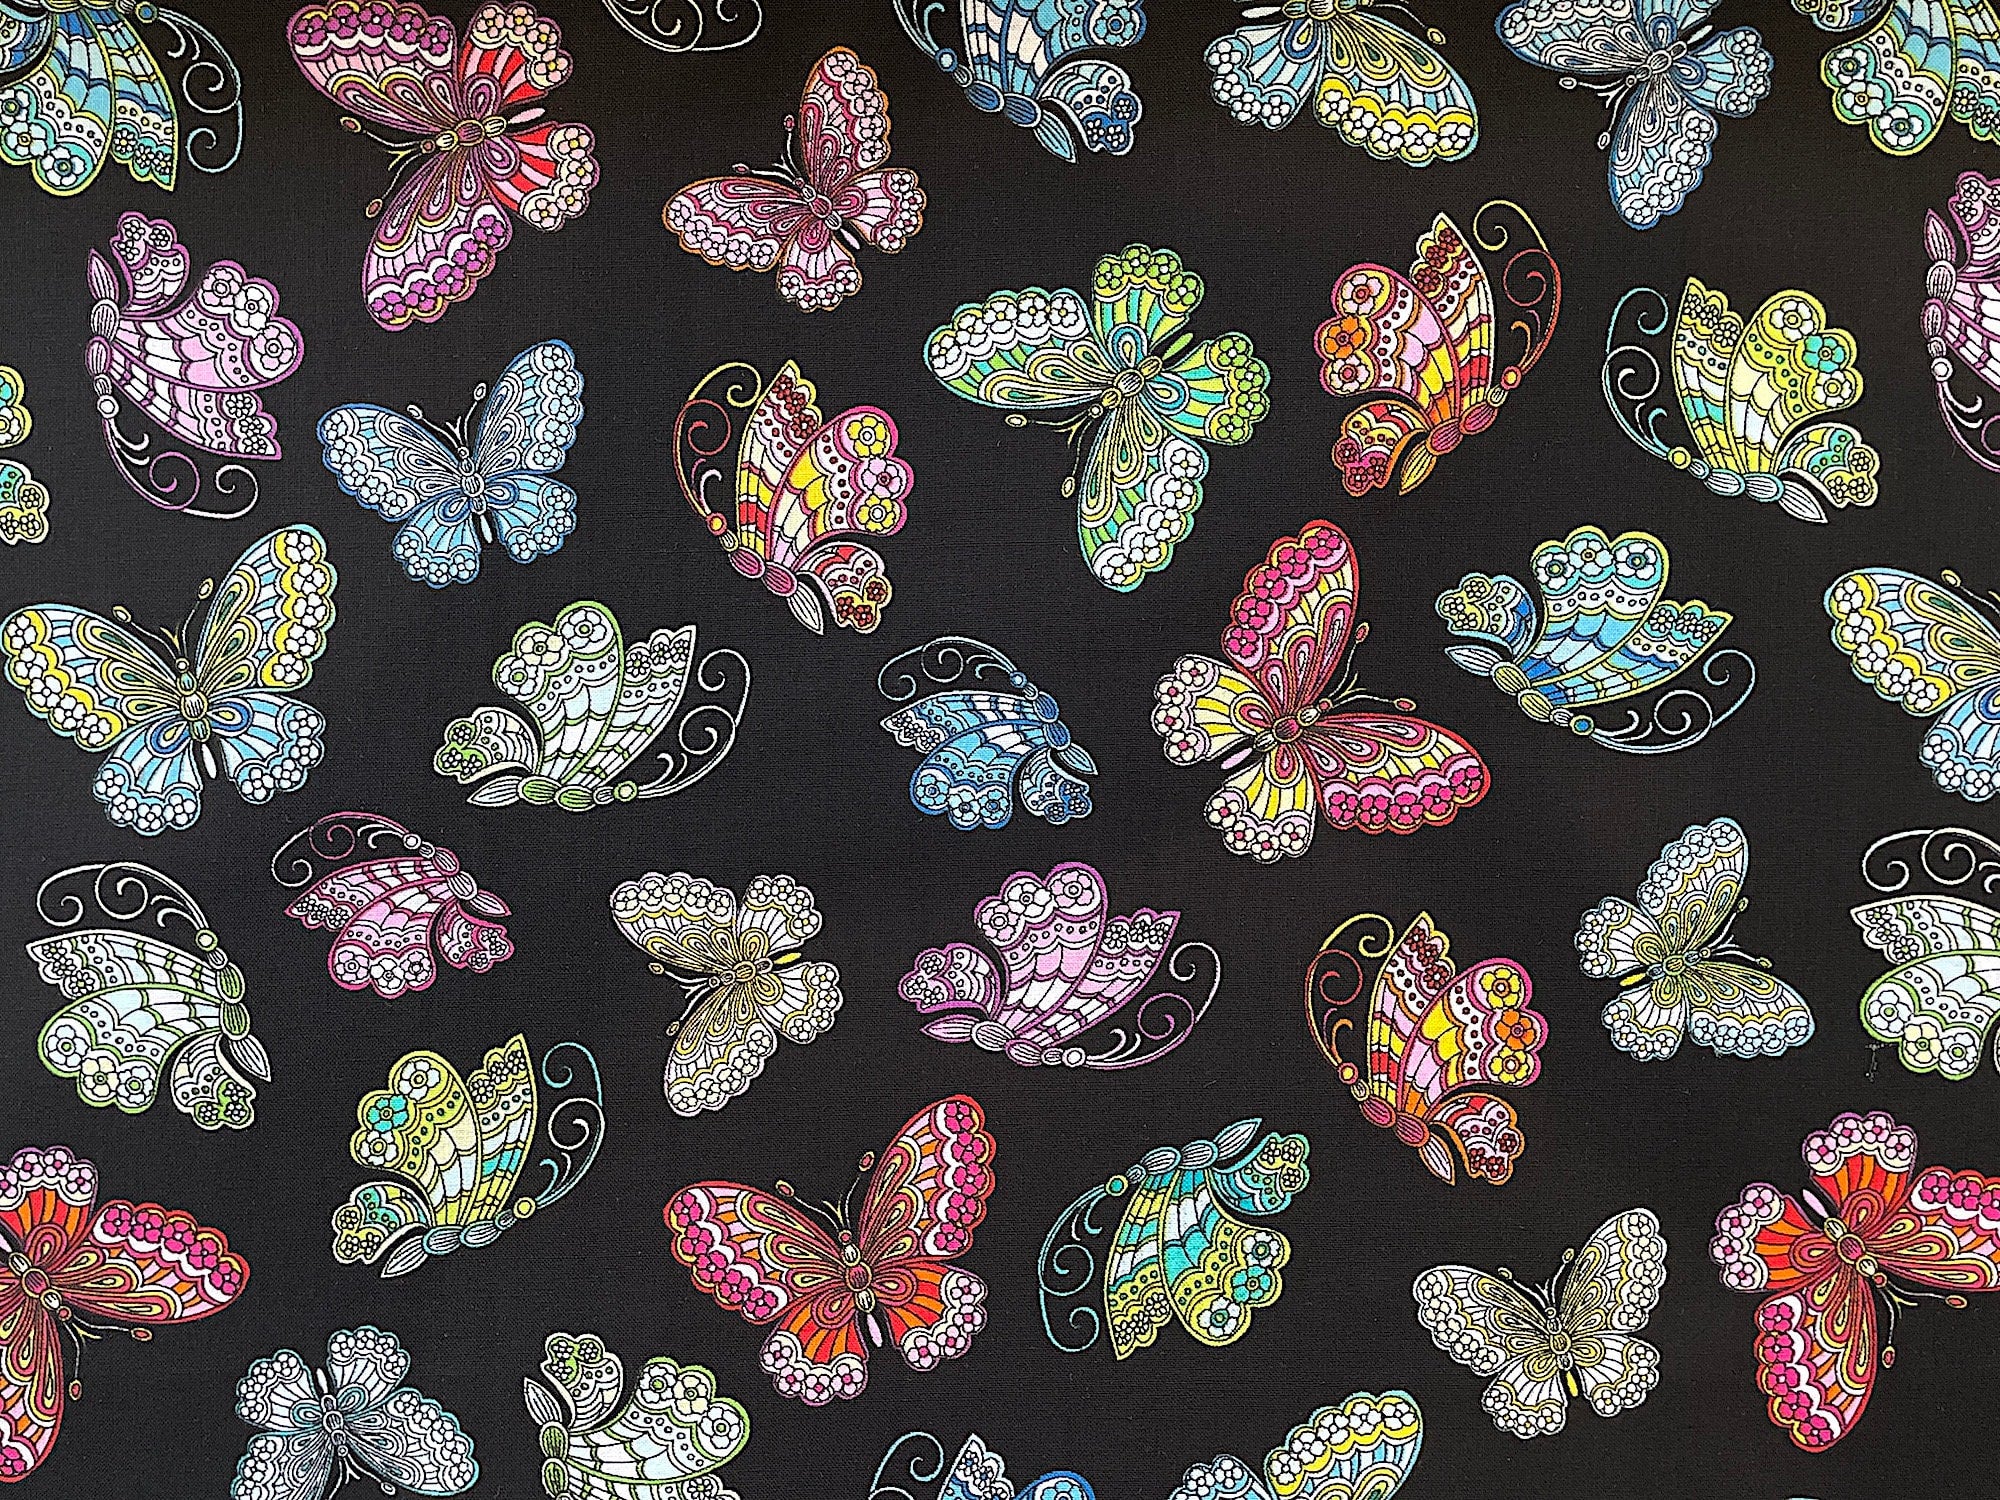 Green, yellow, blue, pink, orange and yellow butterflies cover this black fabric. This fabric is part of the Dazzling Garden Collection by Kanvas Studio